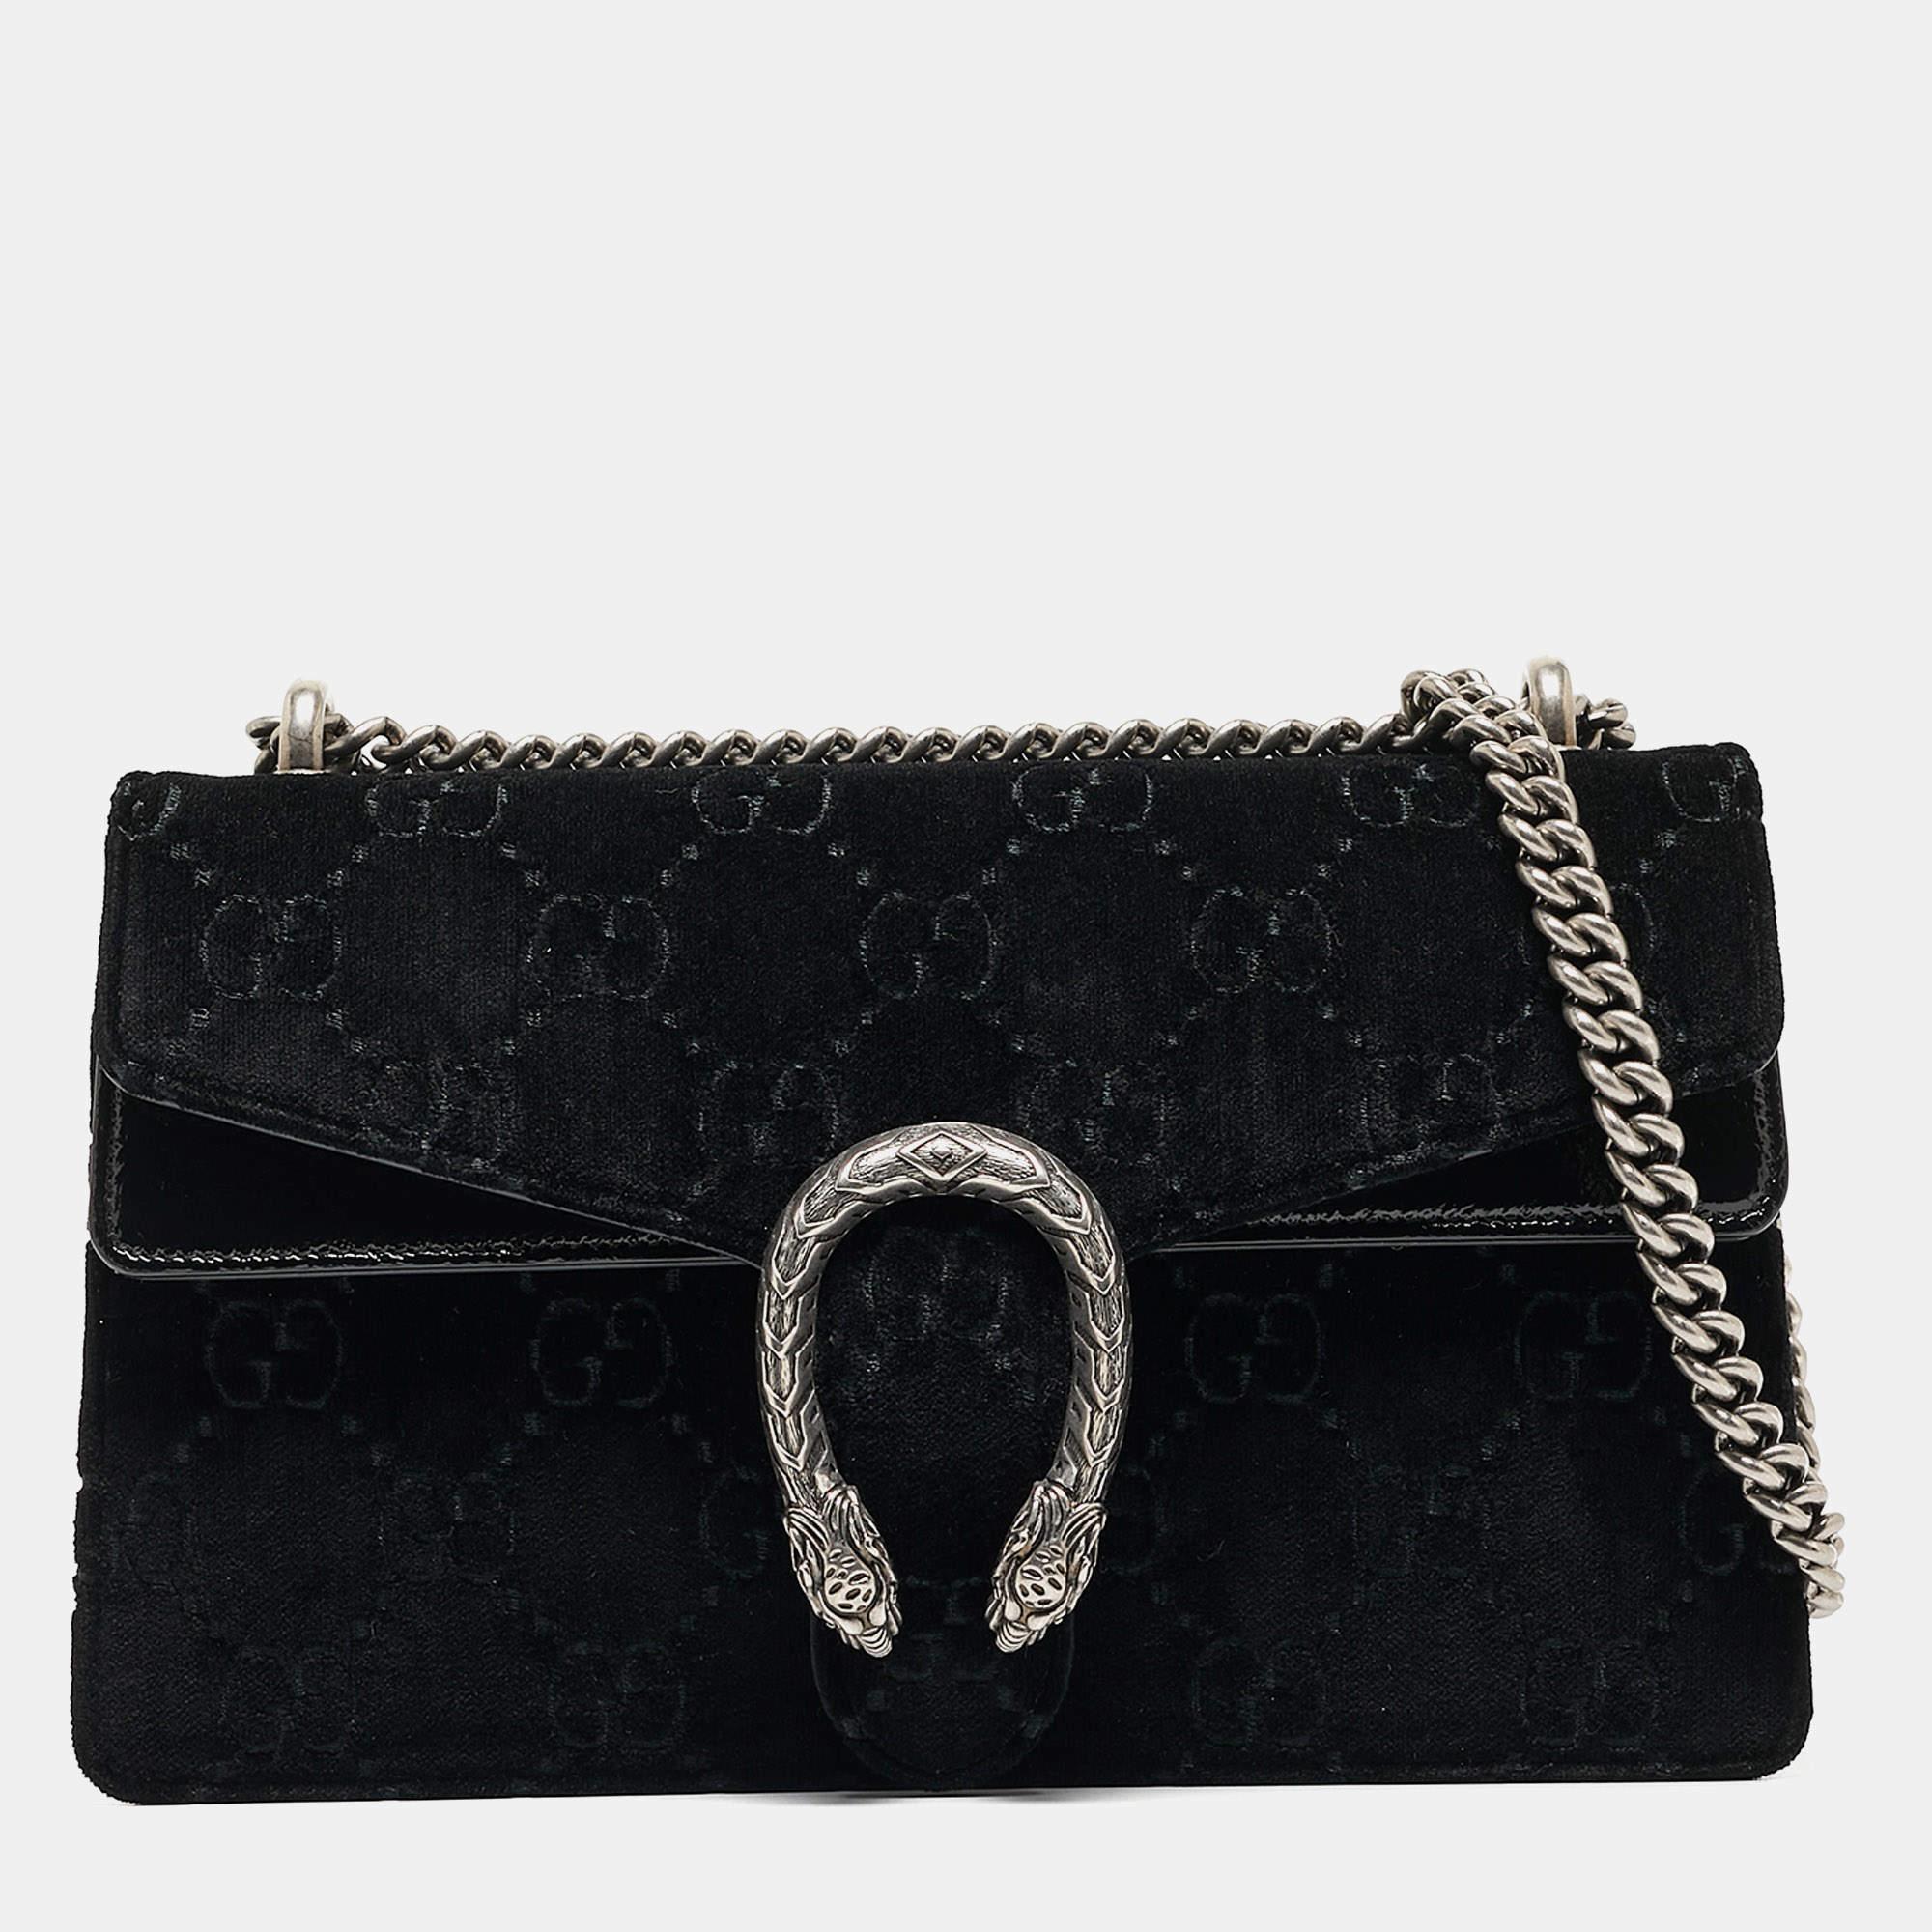 Gucci Black GG Velvet and Patent Leather Small Dionysus Shoulder Bag 9